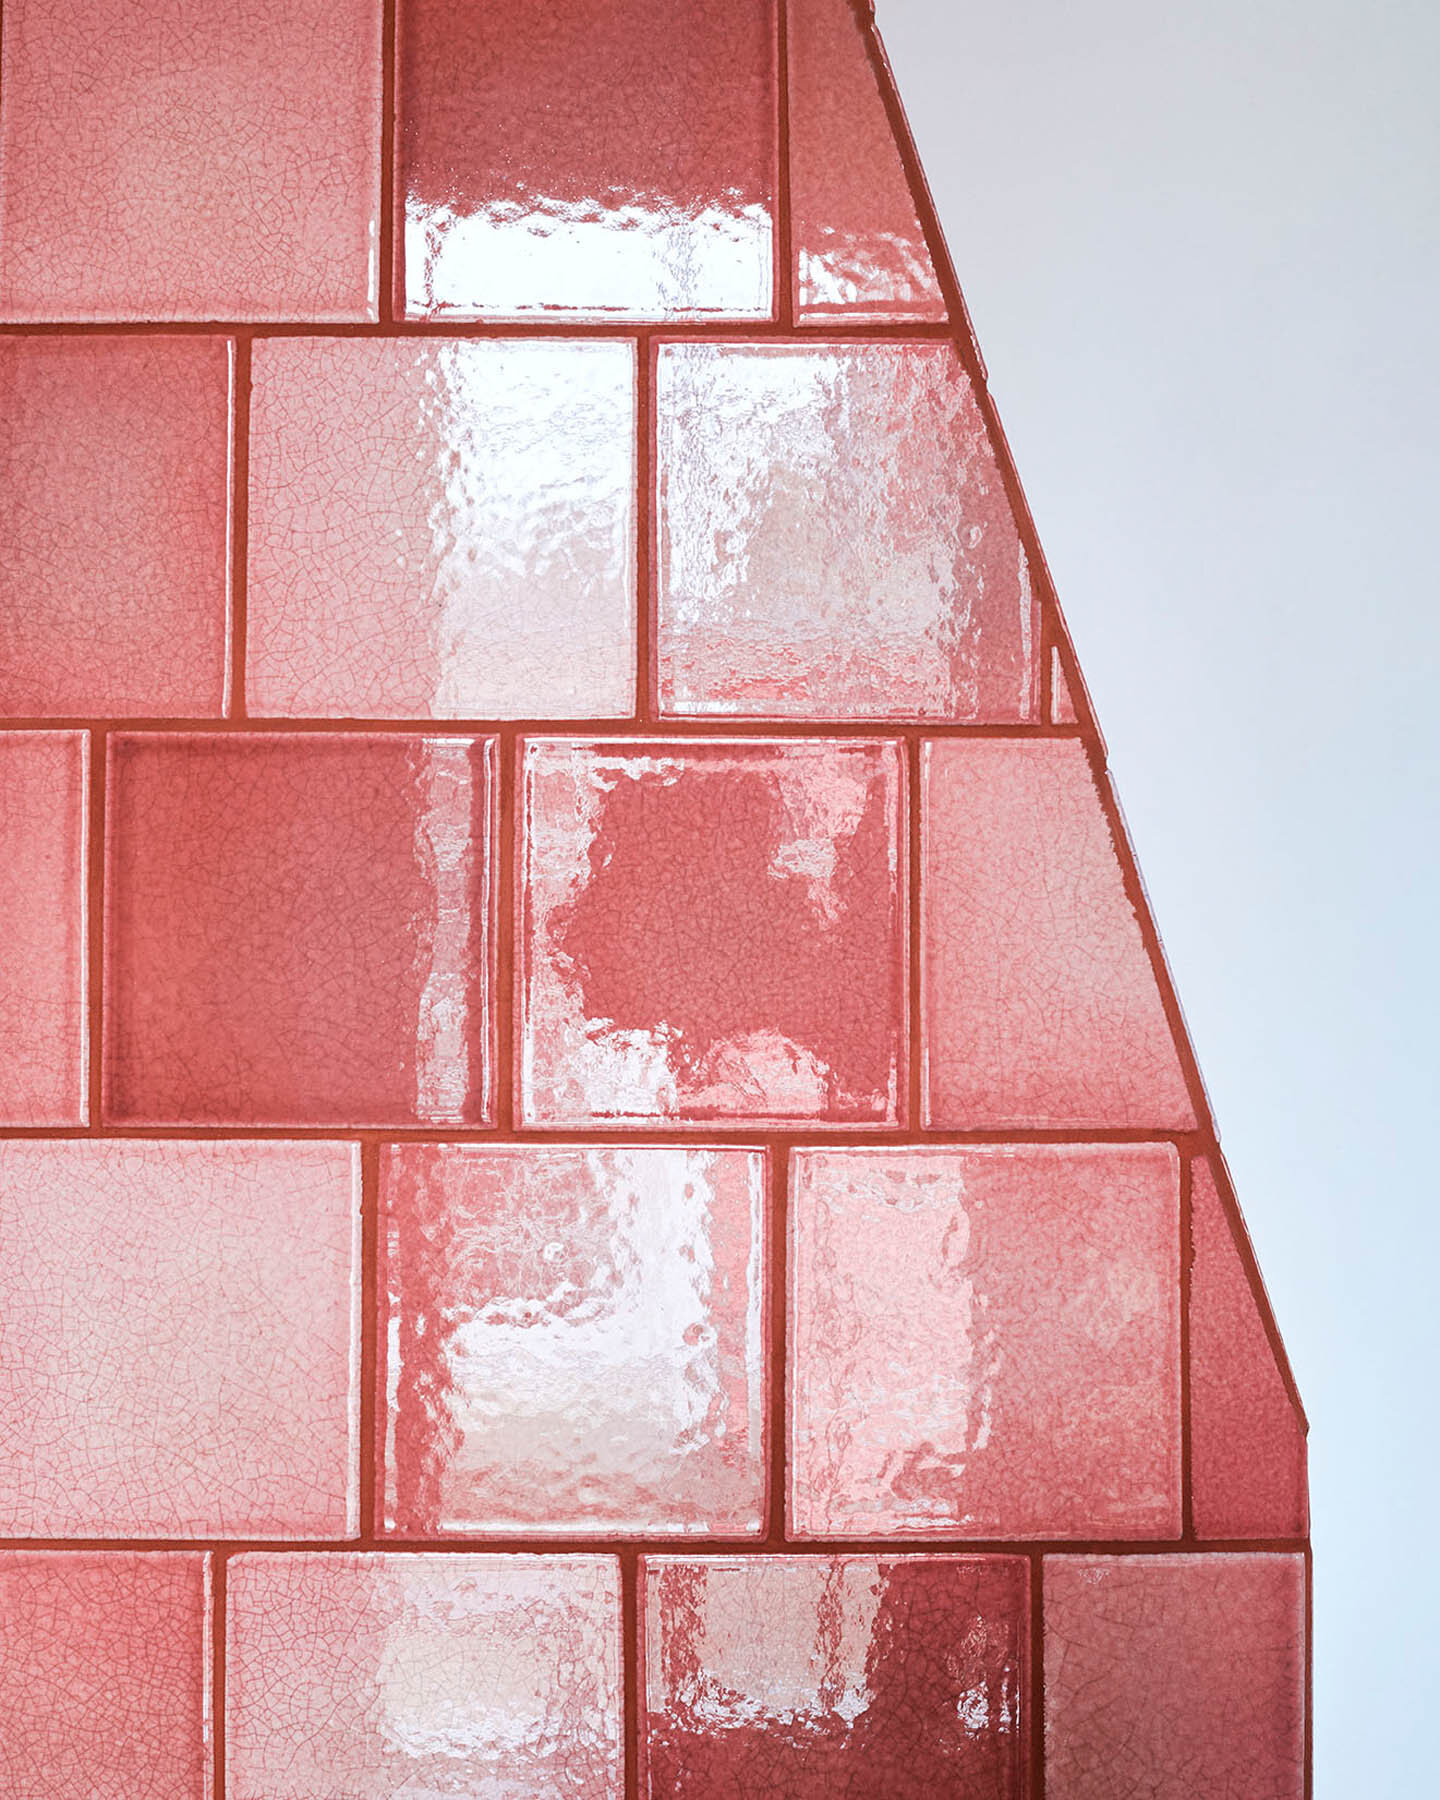 Chimney with lava stone tiles in format 10x10x1 cm glazed with 'Coral Red Shiny Crystal'  (Copy)